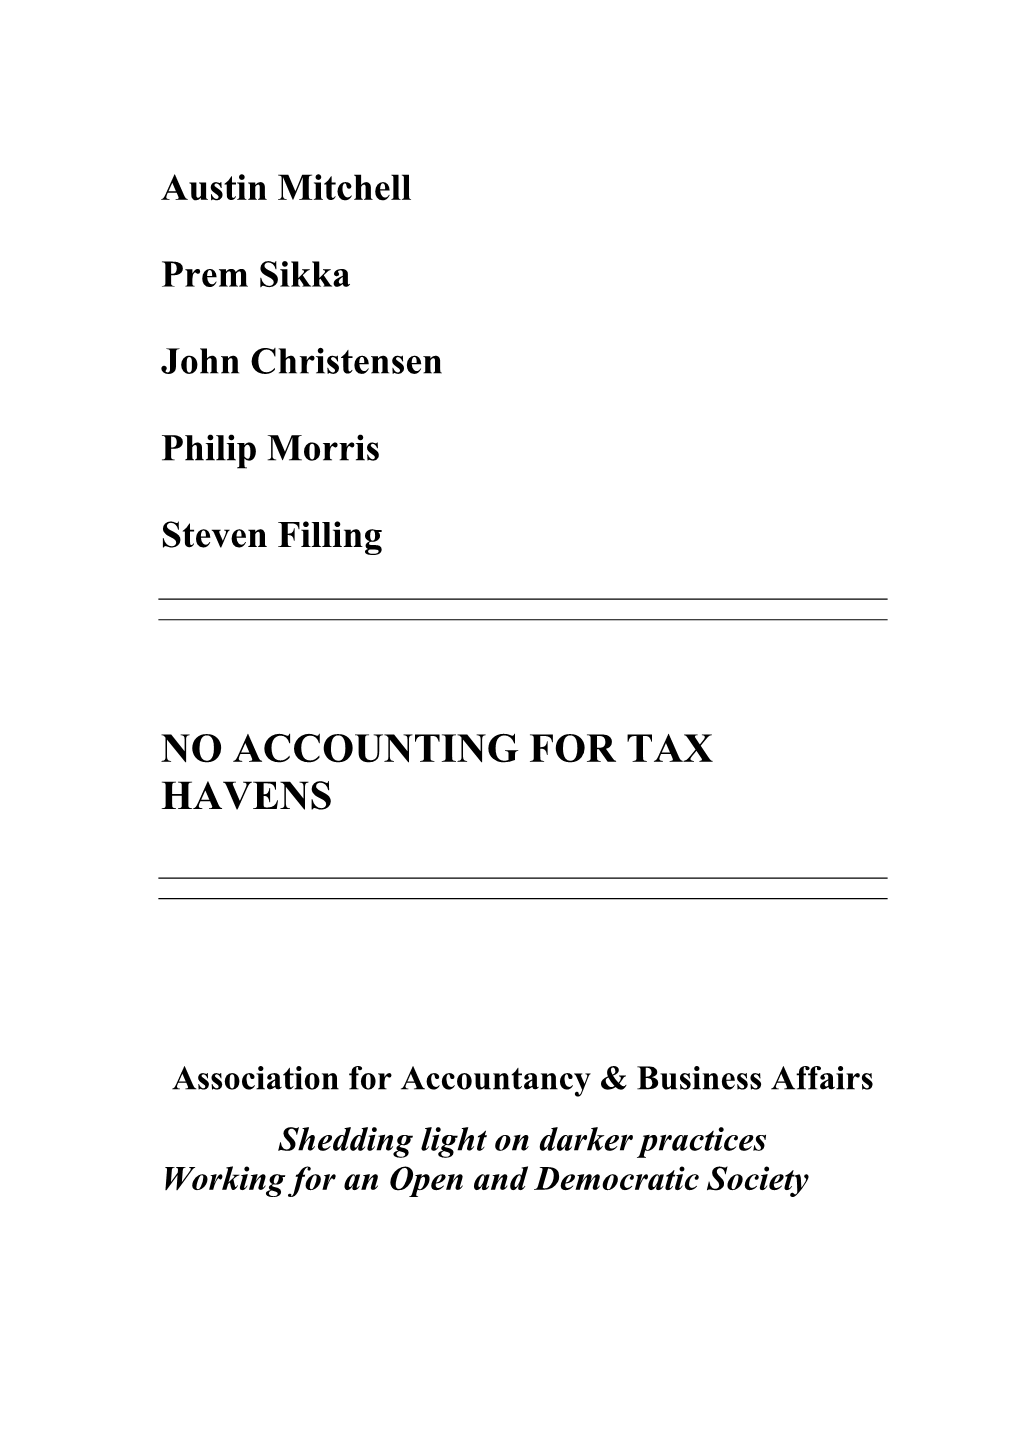 No Accounting for Tax Havens